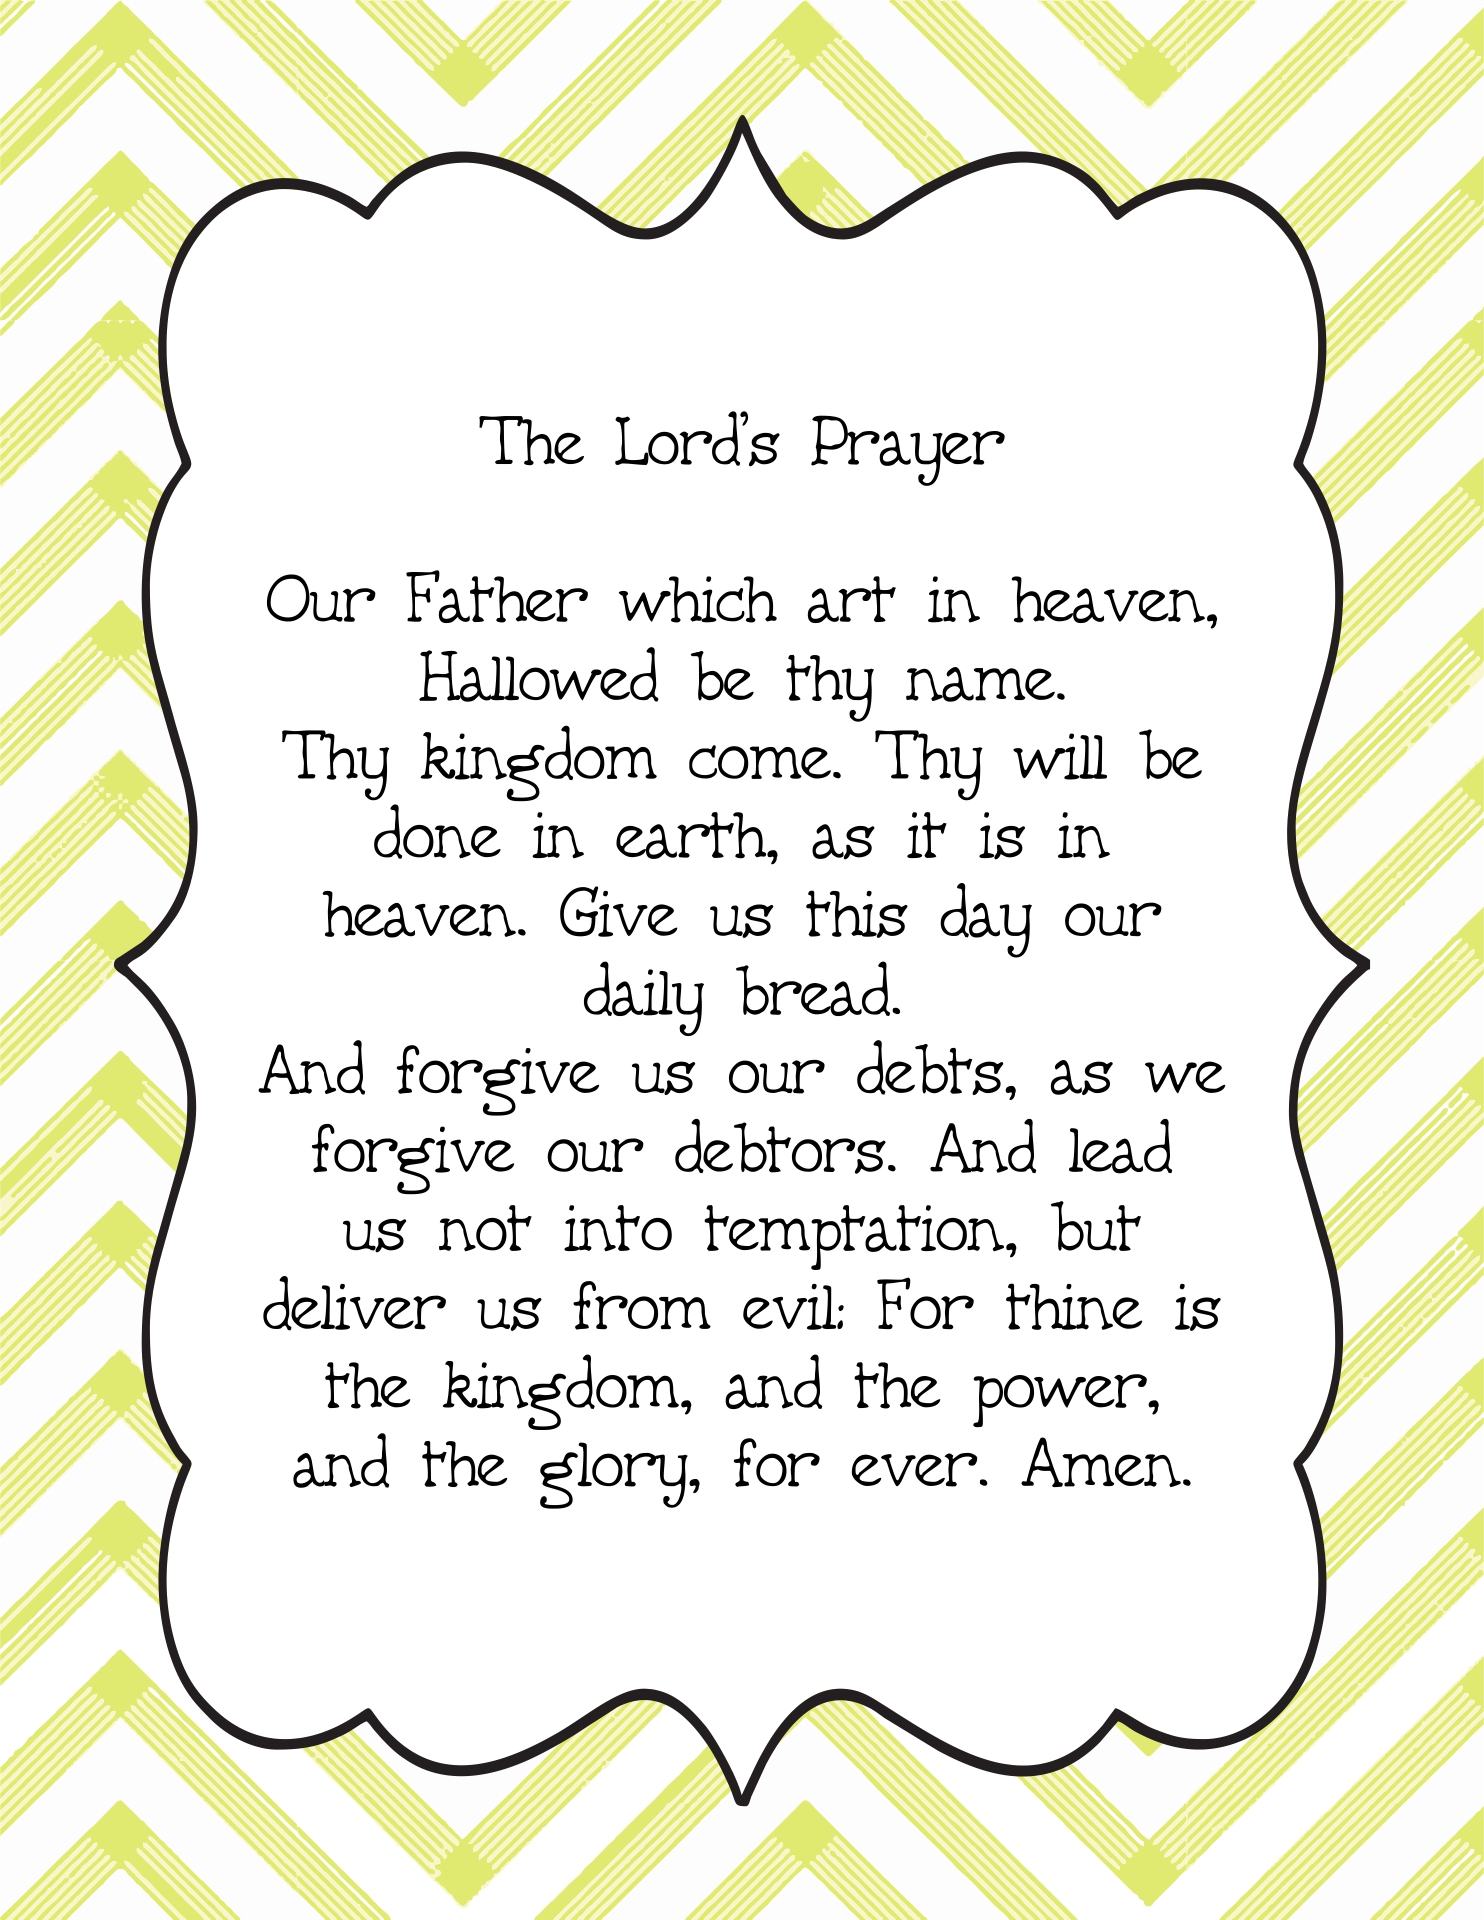 free-printable-the-lord-s-prayer-activity-sheets